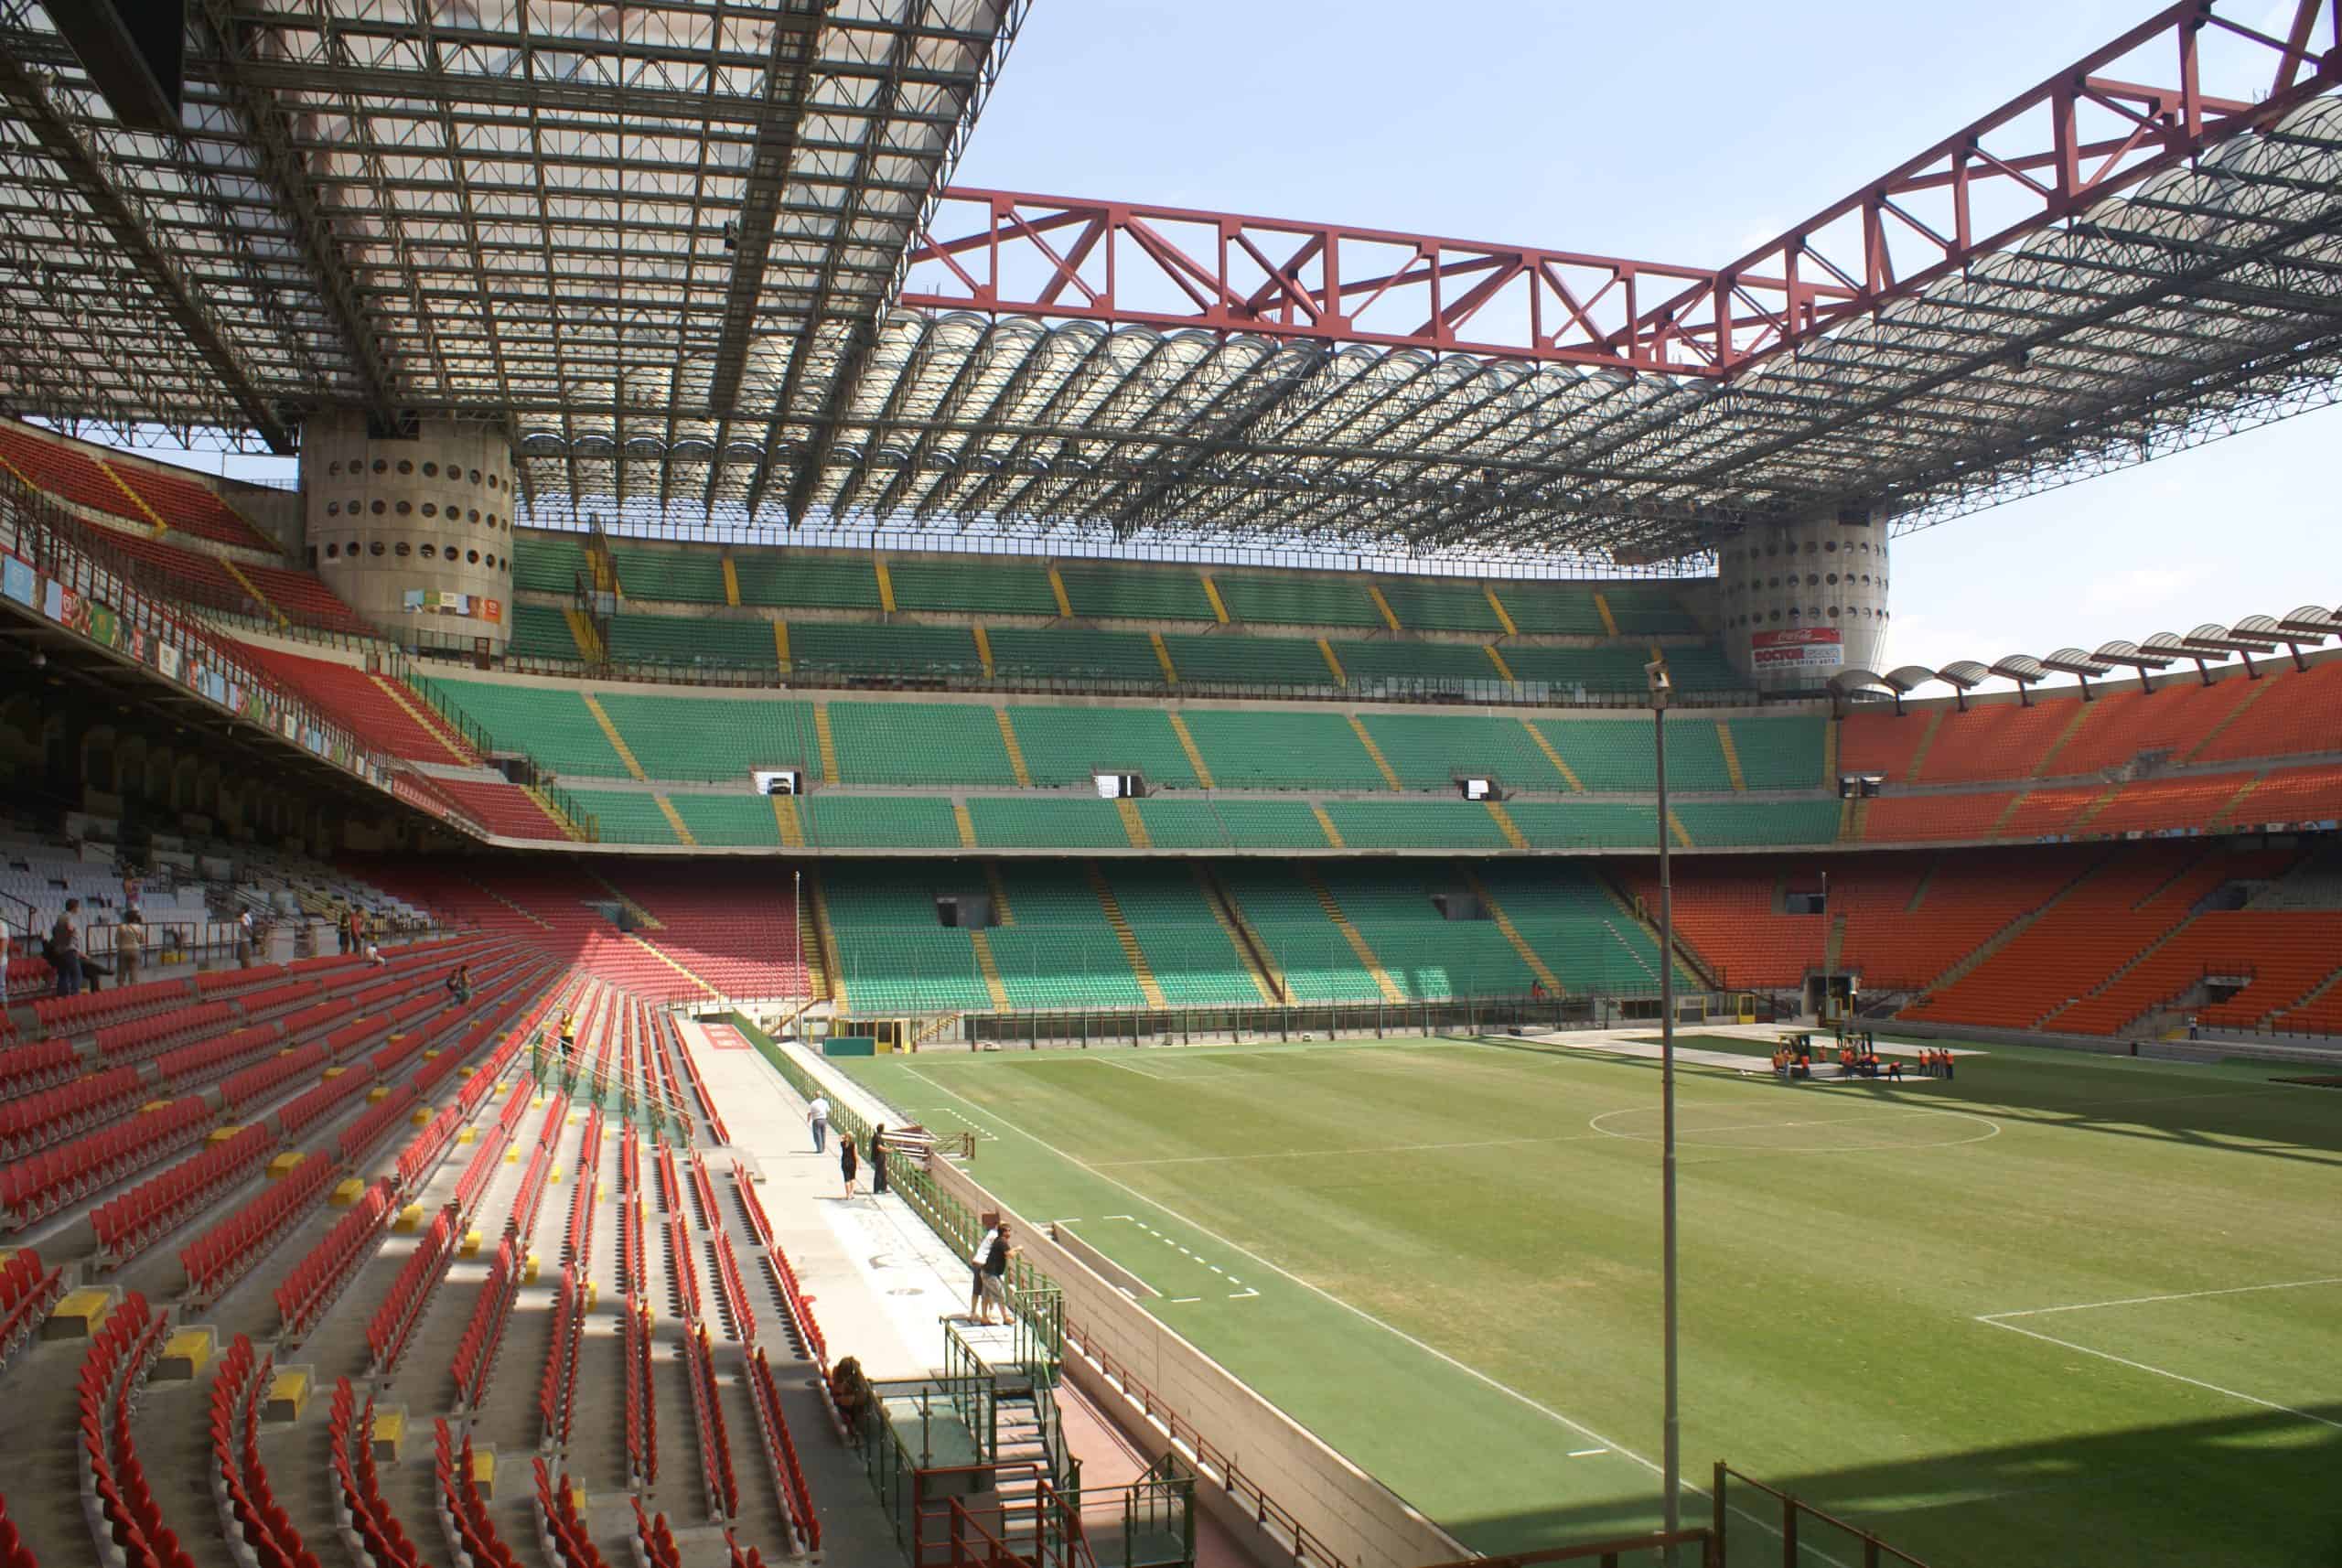 <p><strong>Year Construction Began:</strong> 1925</p>    <p><strong>Construction Completion:</strong> 1926</p>    <p>The San Siro Stadium is in Milan, Italy. Milan is the most industrial city in Italy, known for its architecture, art, fashion, food, football, and history. It is a great city for visitors to sightsee. </p><p>Remember to scroll up and hit the ‘Follow’ button to keep up with the newest stories from Seattle Travel on your Microsoft Start feed or MSN homepage!</p>